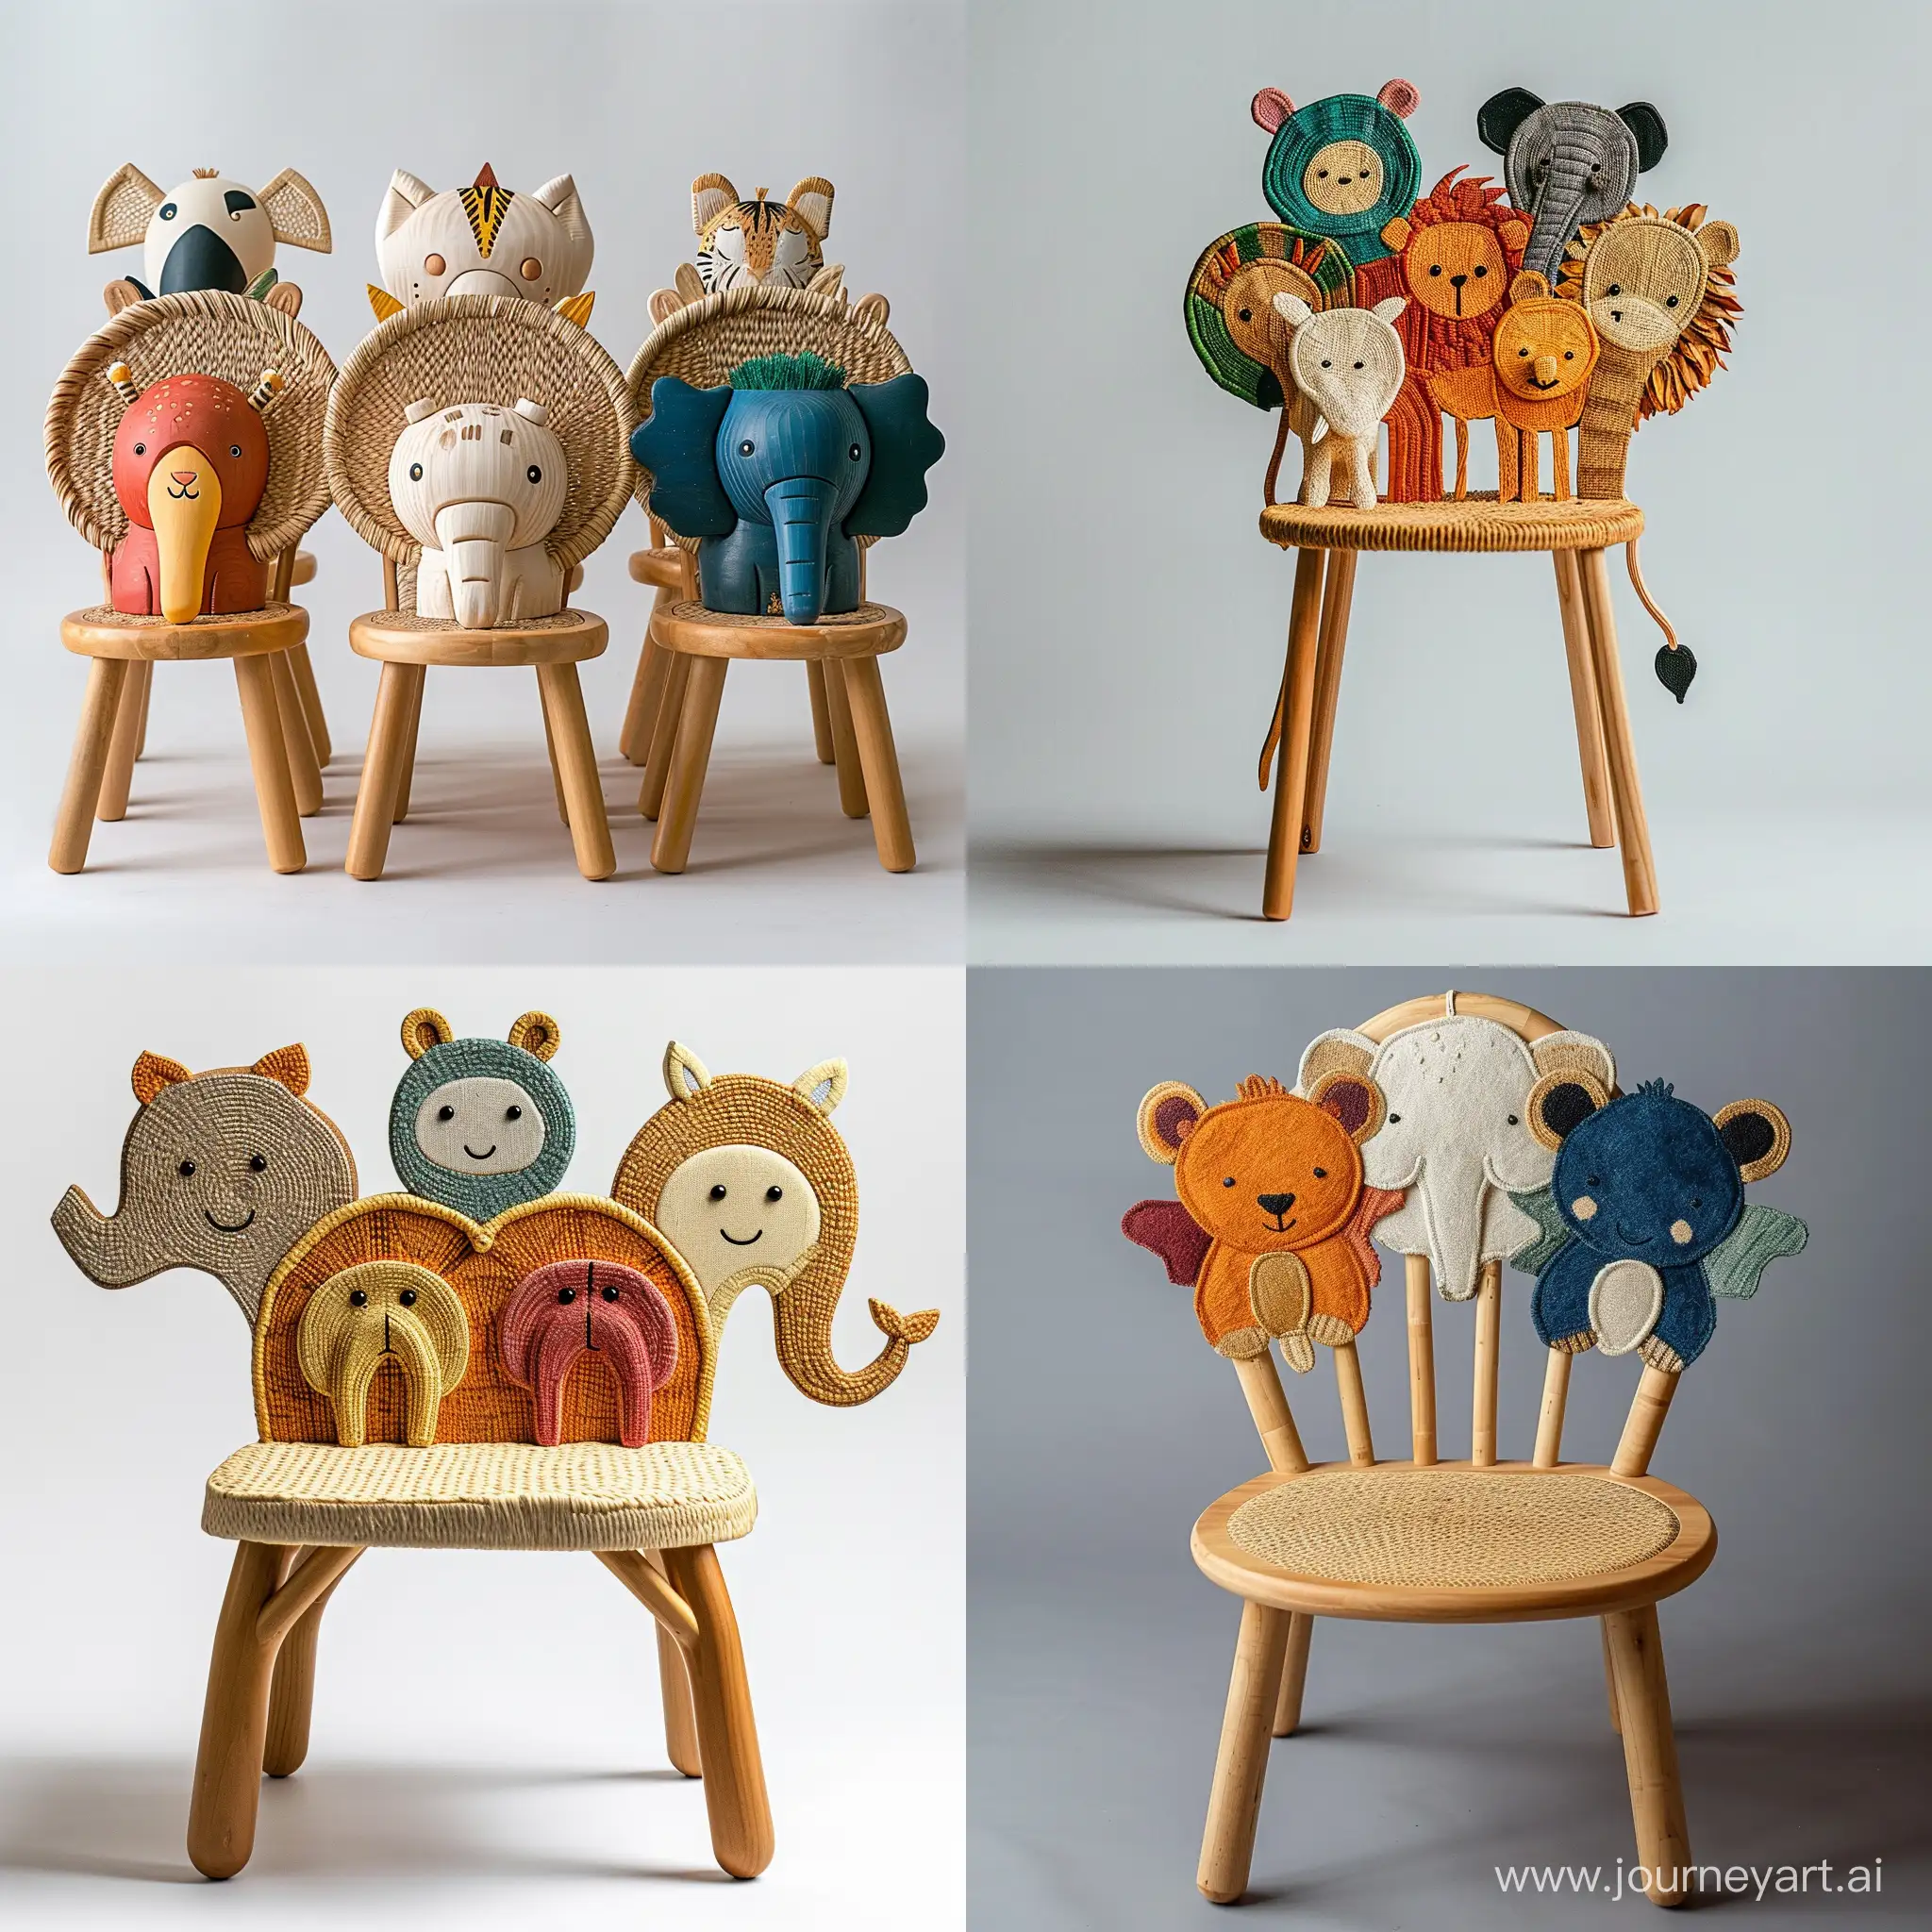 imagine an image of a sturdy children’s chair inspired by cute safari animals, with backrests shaped like different creatures. Use recycled wood for the frame and woven plant fibers for seating areas, depicted in colors representative of the chosen animals. The seat should stand approximately 30cm tall, built to educate about wildlife and ensure durability.realistic  style